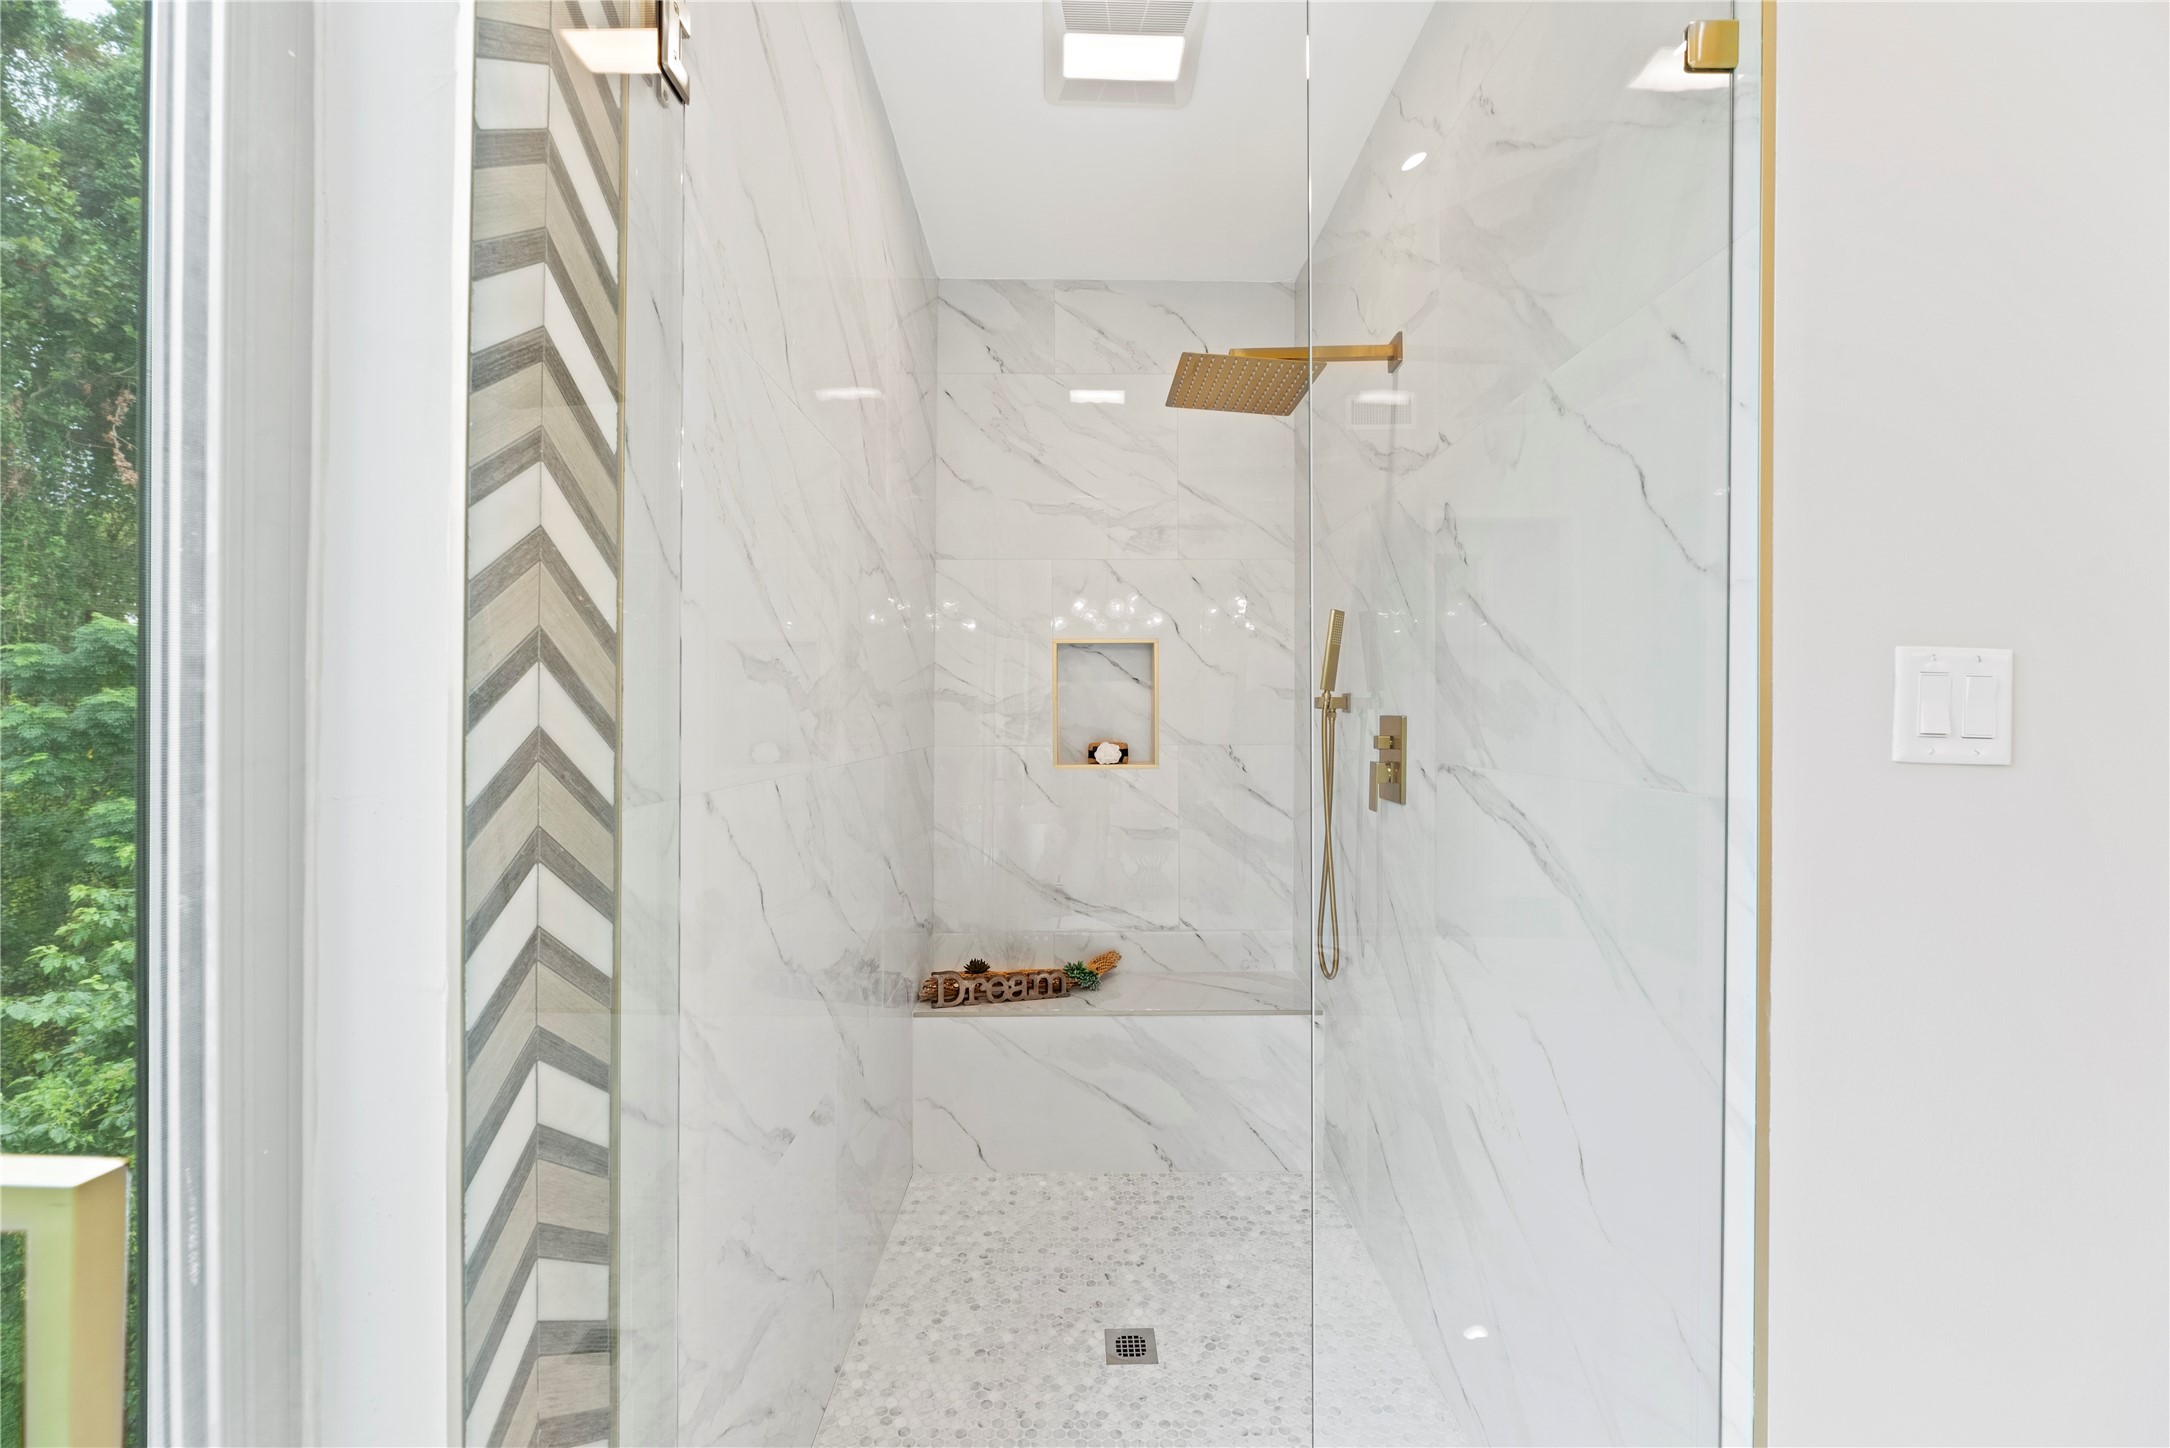 The separate [primary bath] shower features glass shower door, a rain water feature, brushed brass fixtures, & a bench!